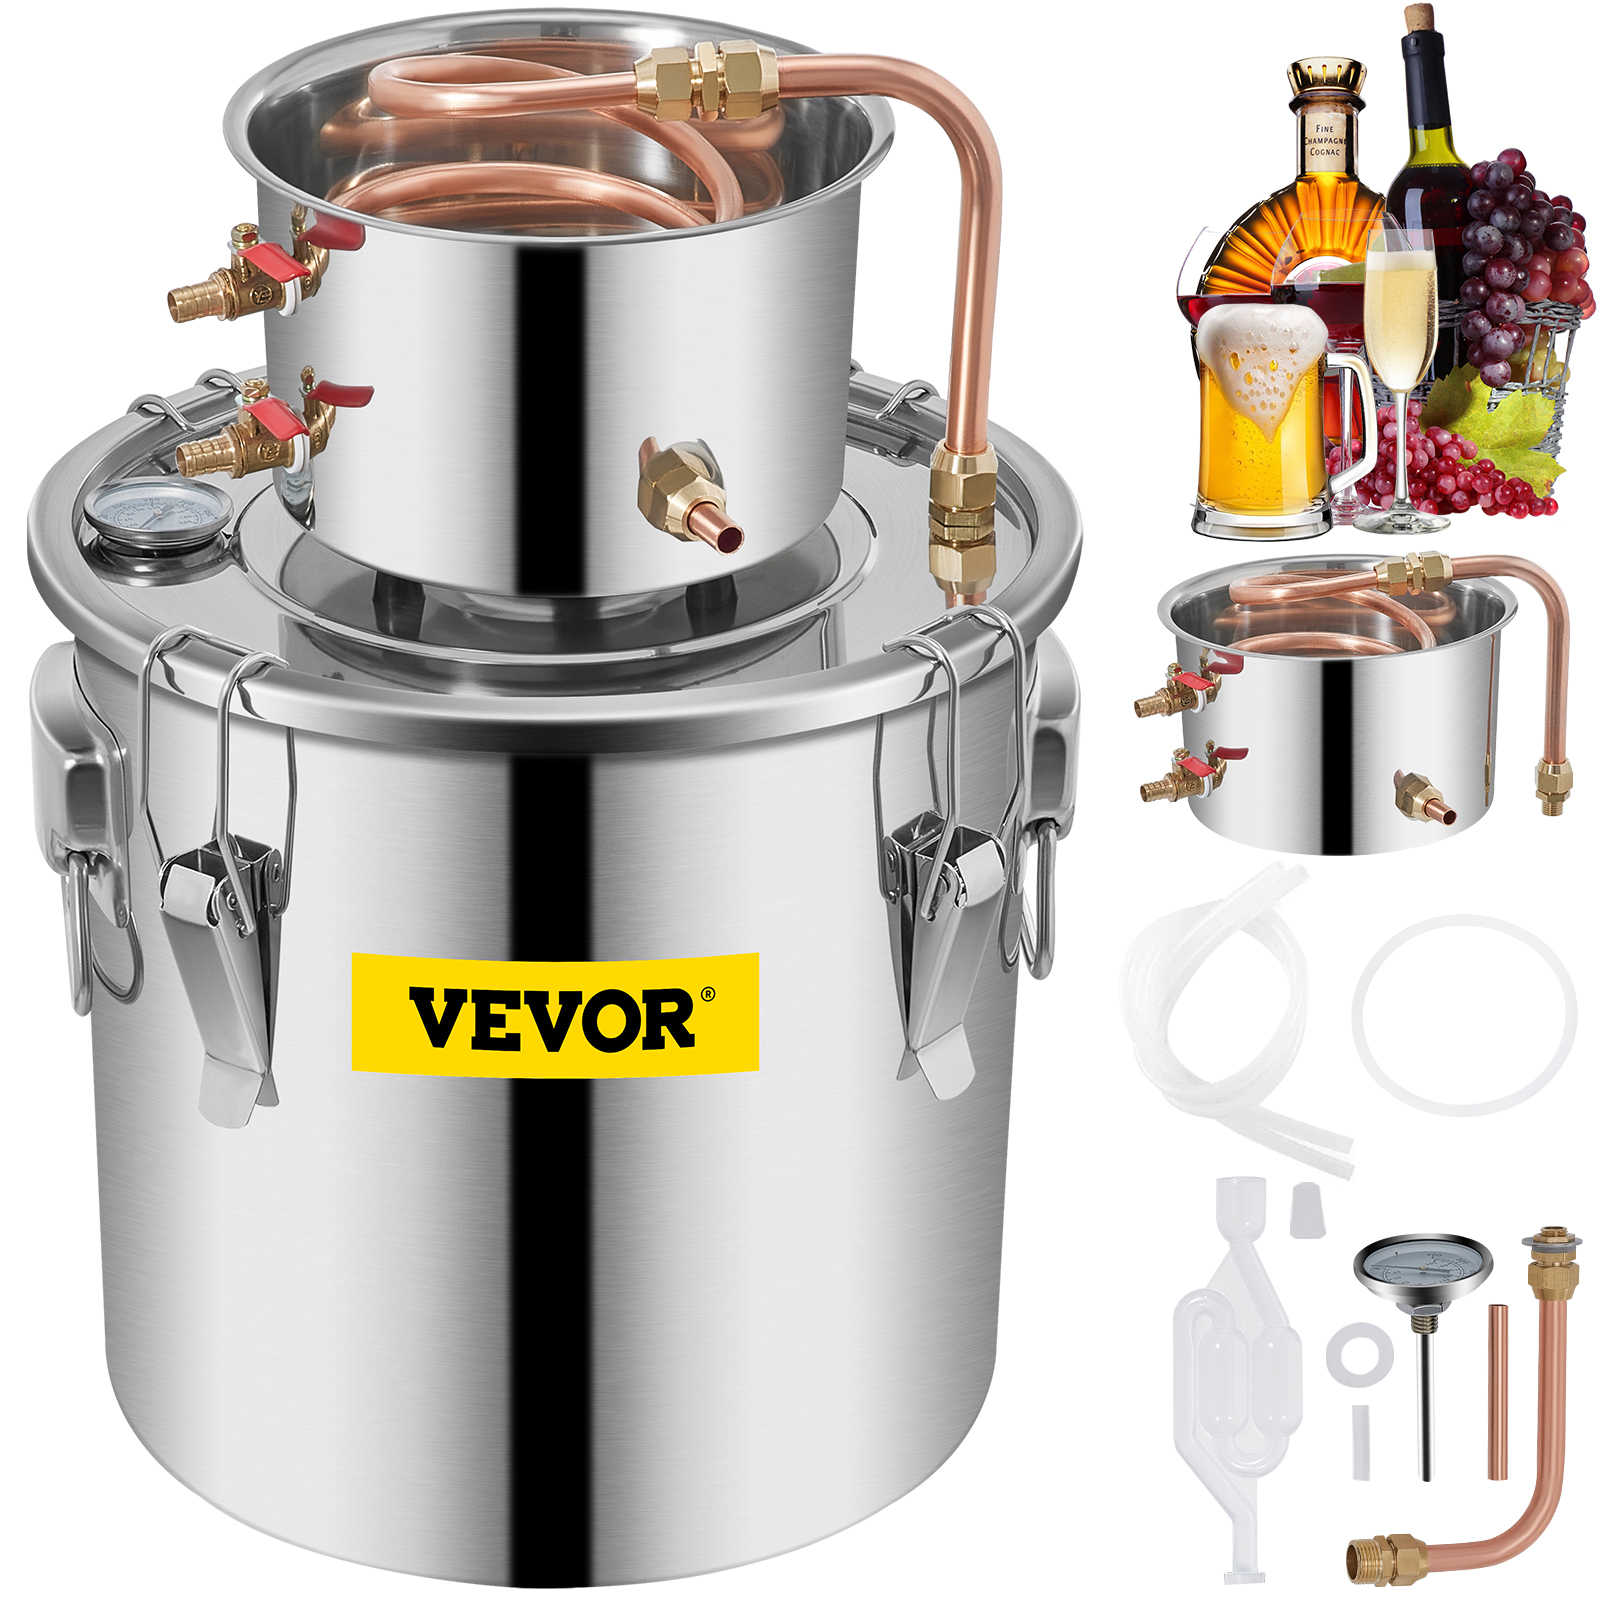 Ejoyous 3 Pot Stainless Steel Water Alcohol Distiller System Copper Tube Boiler Small Home Brew Wine Making Kit Water Distiller for DIY Whisky Wine Brandy 20L 5 Gallons Silver 